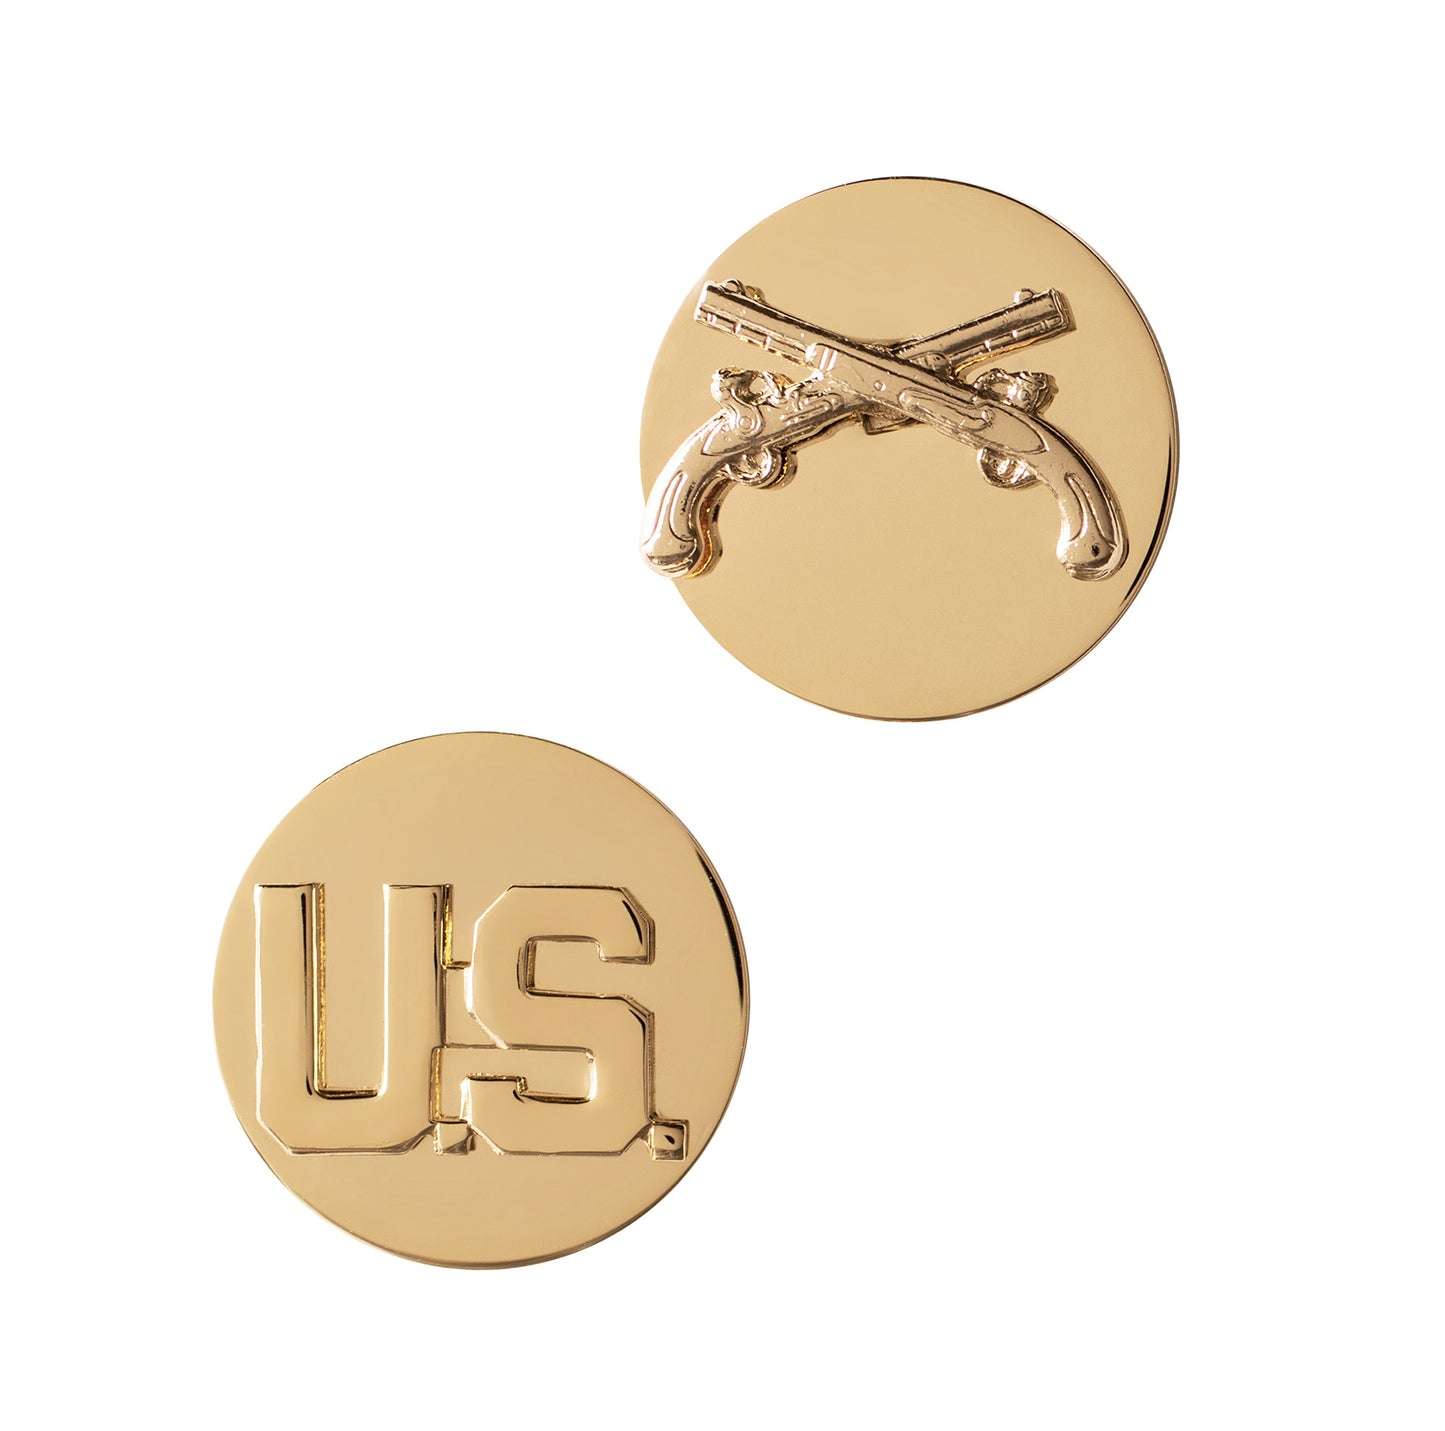 U.S. Army Enlisted Military Police & U.S. STA-BRITE® pin-on